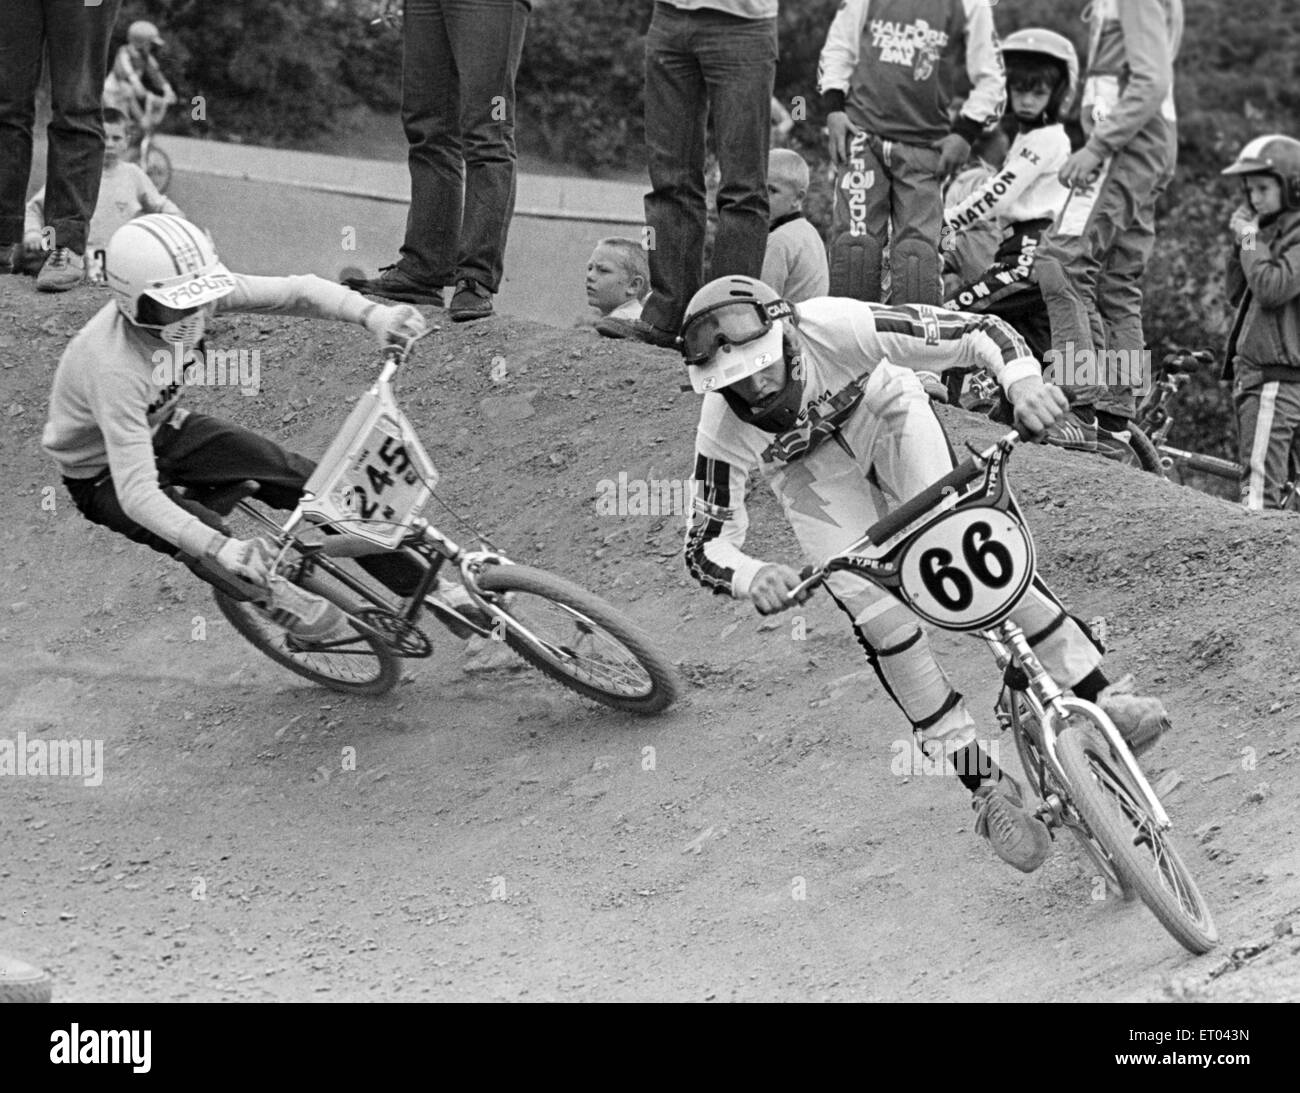 13 year old competitors battle their way through a sling shot turn during the Norsport BMX cycle race at Margrove Park, 8th August 1983. Stock Photo